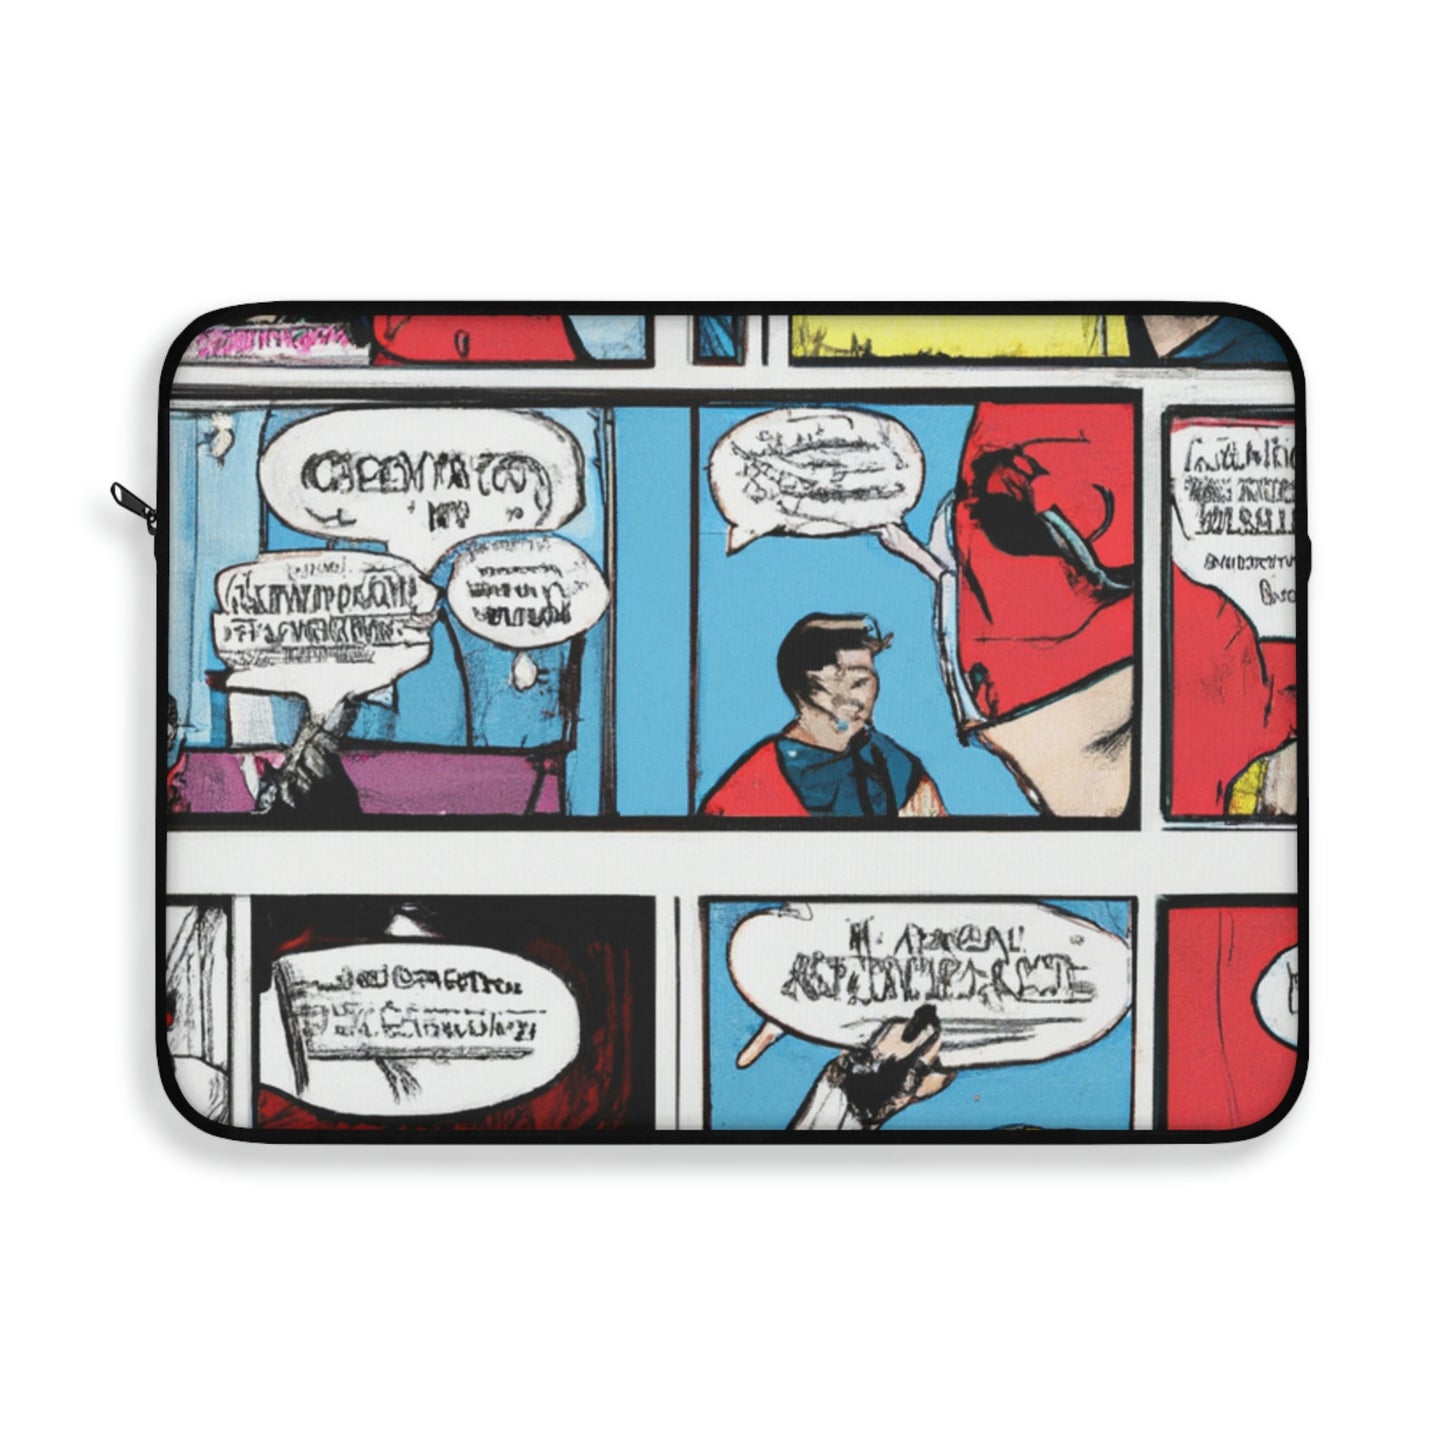 Bing Bop the Space Cadet - Comic Book Collector Laptop Computer Sleeve Storage Case Bag